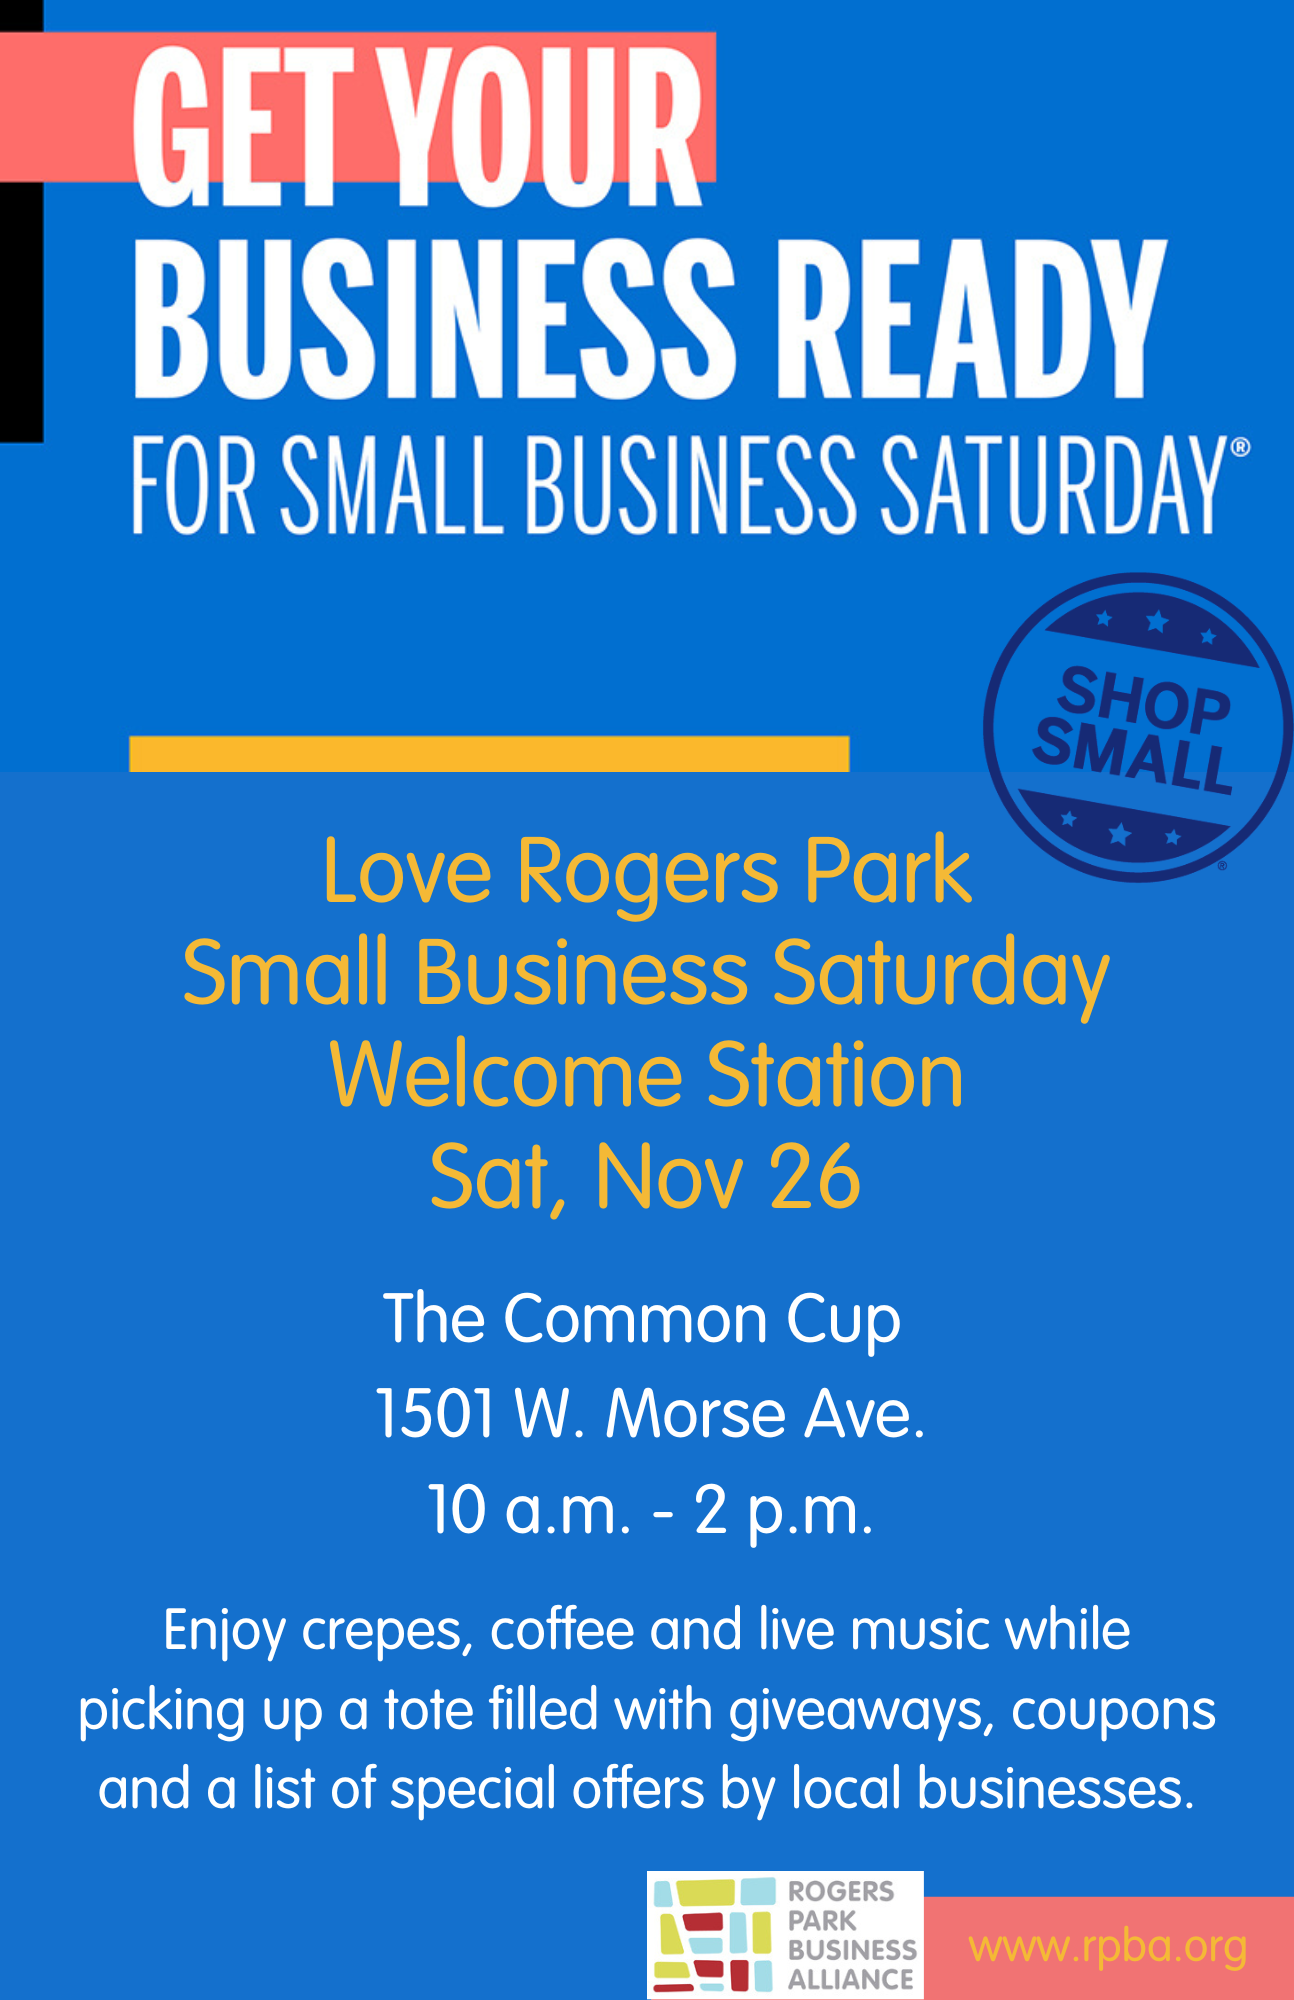 Love Rogers Park Small Business Saturday Welcome Station, rogers-park-business-alliance